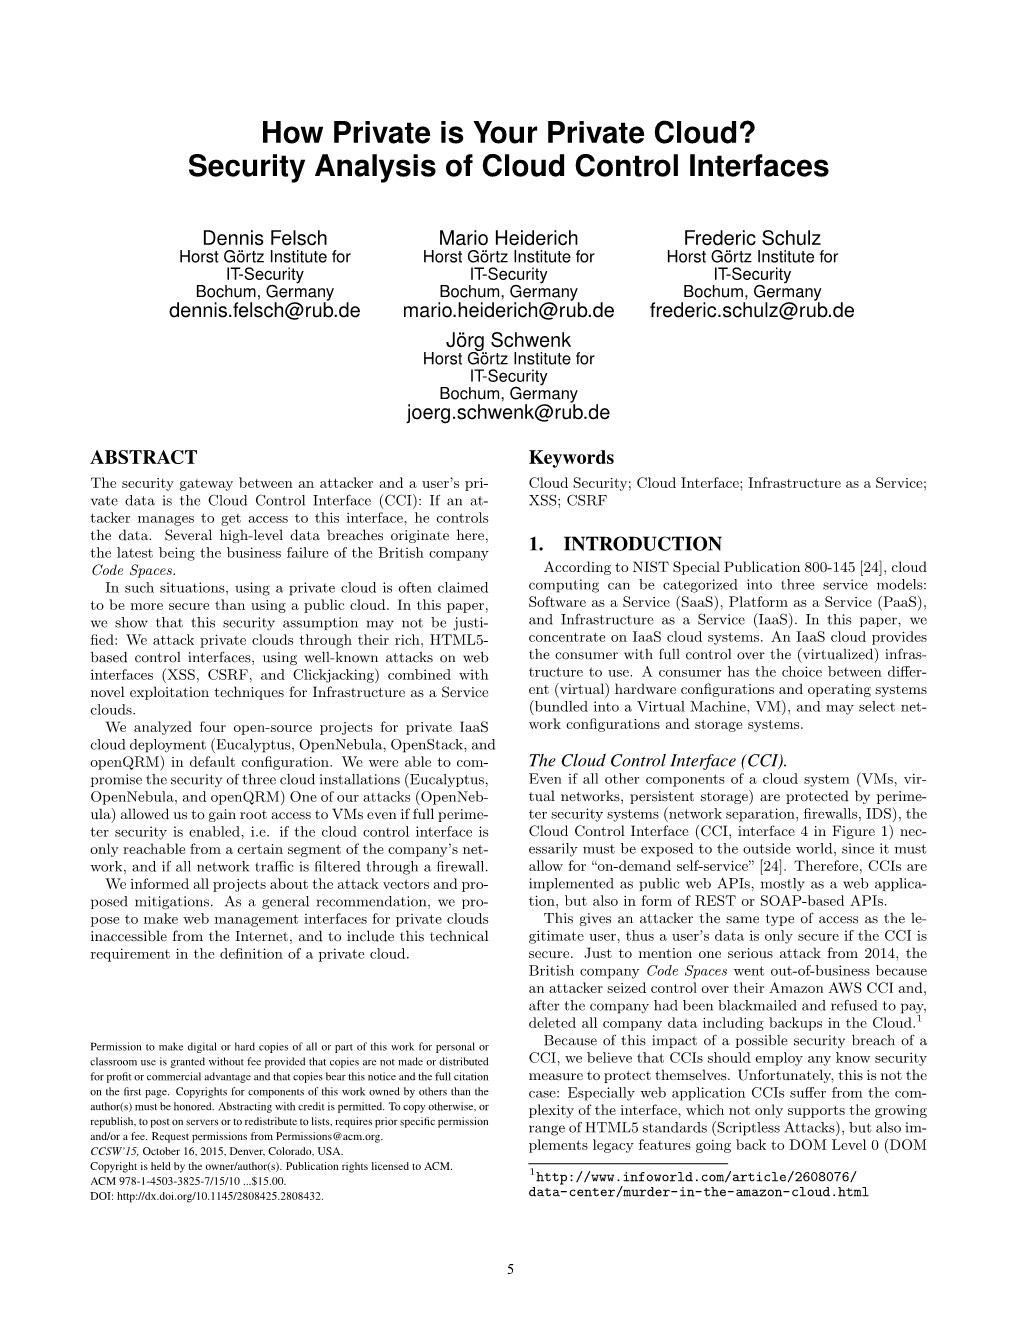 Security Analysis of Cloud Control Interfaces